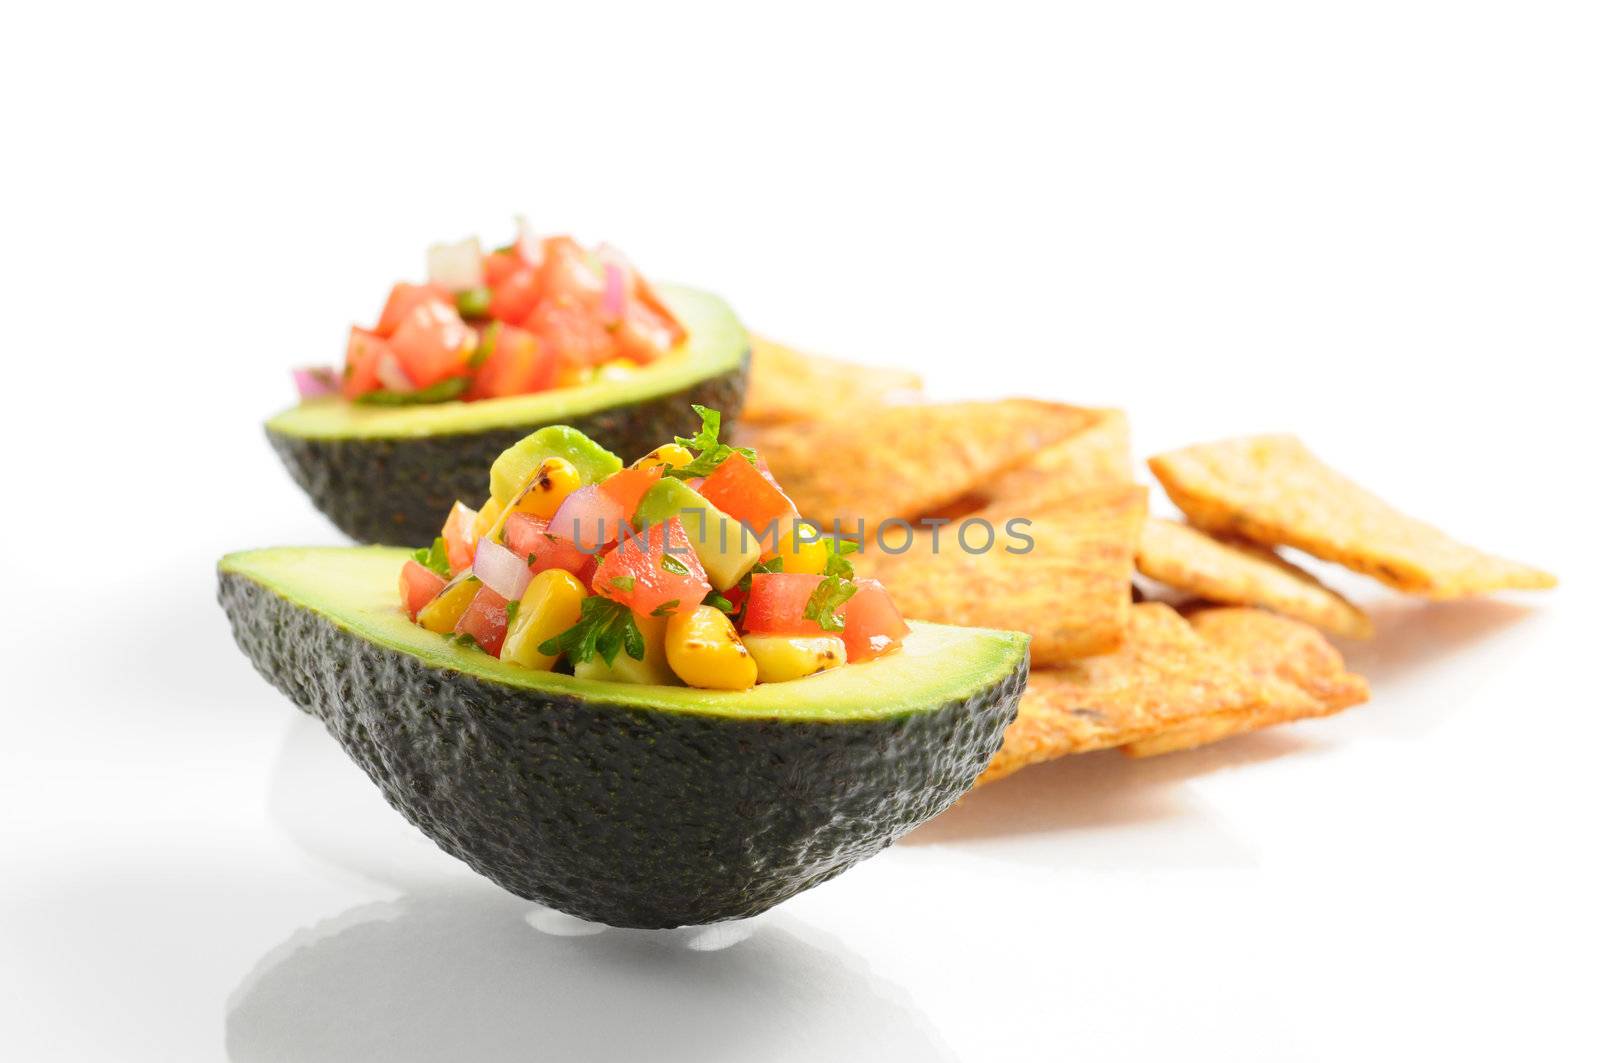 Salsa in Avocado by billberryphotography